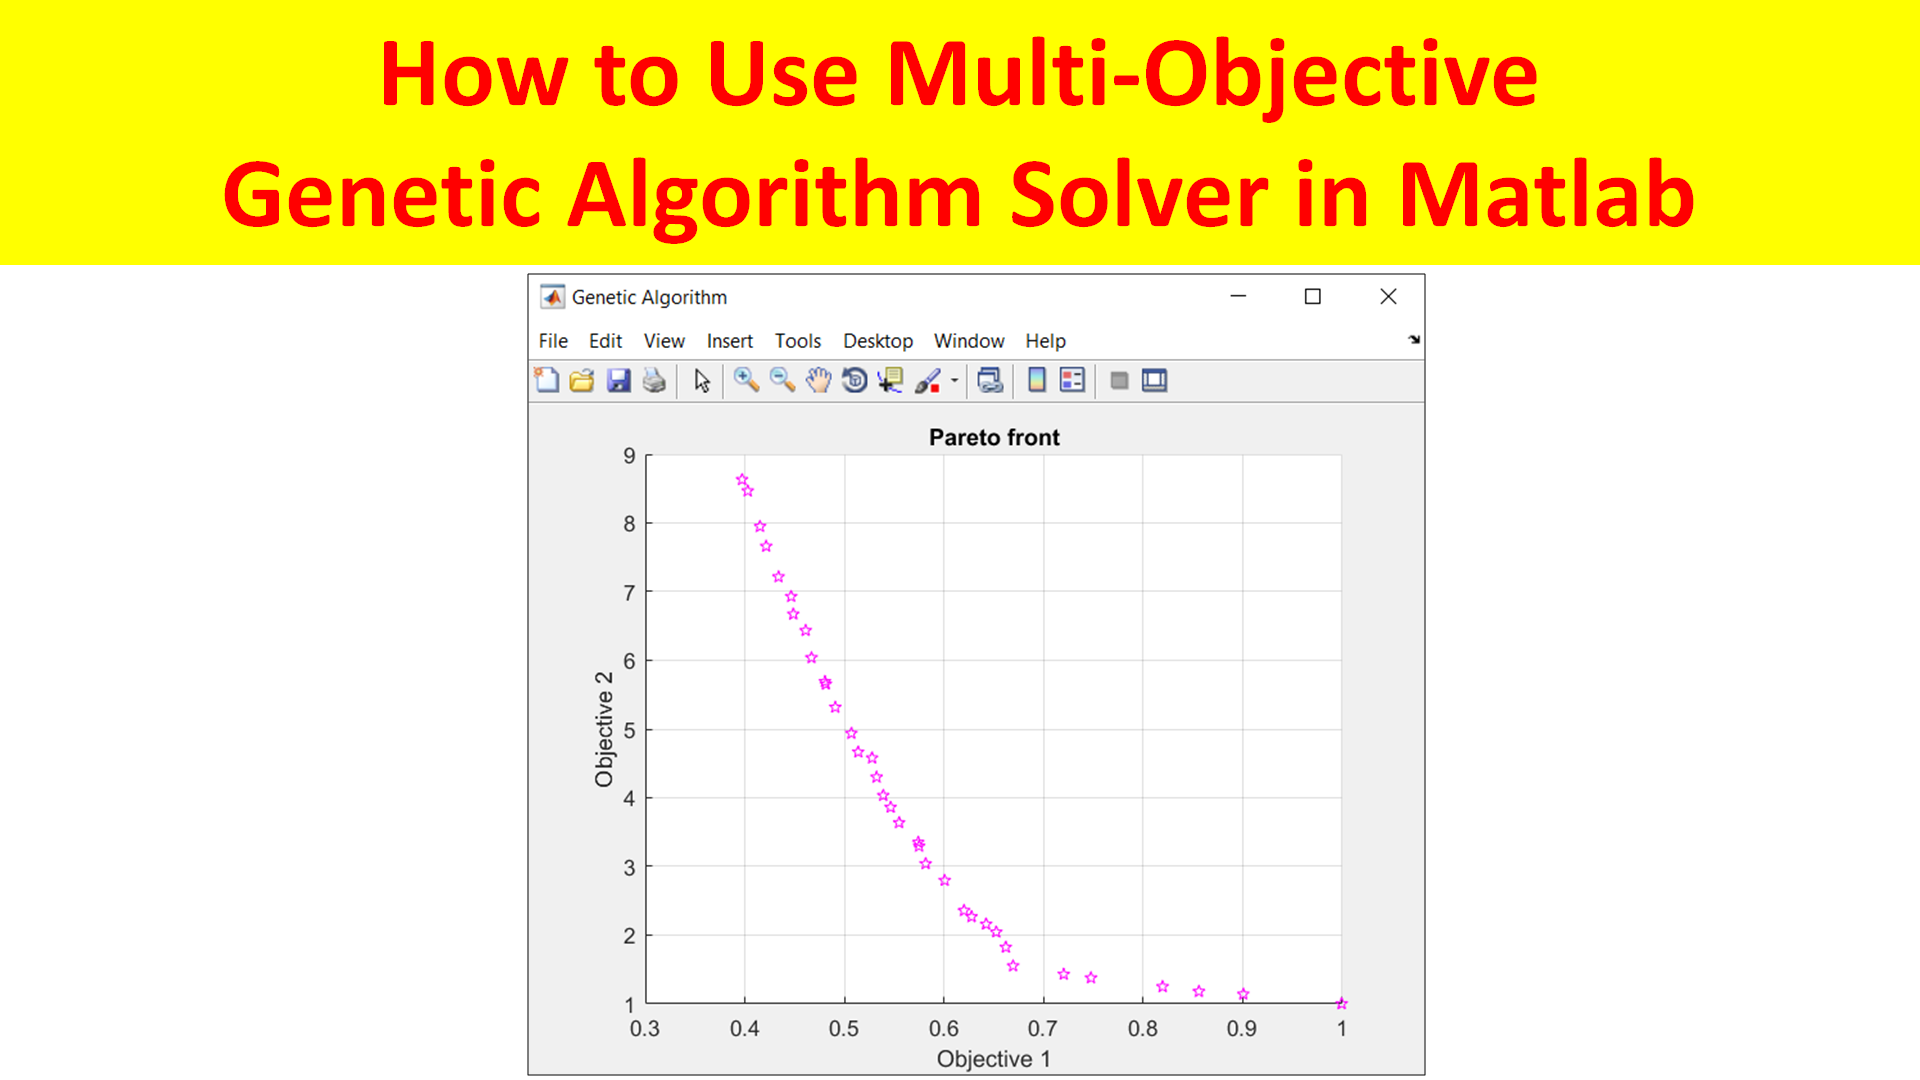 How to Use Multi-Objective Genetic Algorithm Solver in Matlab